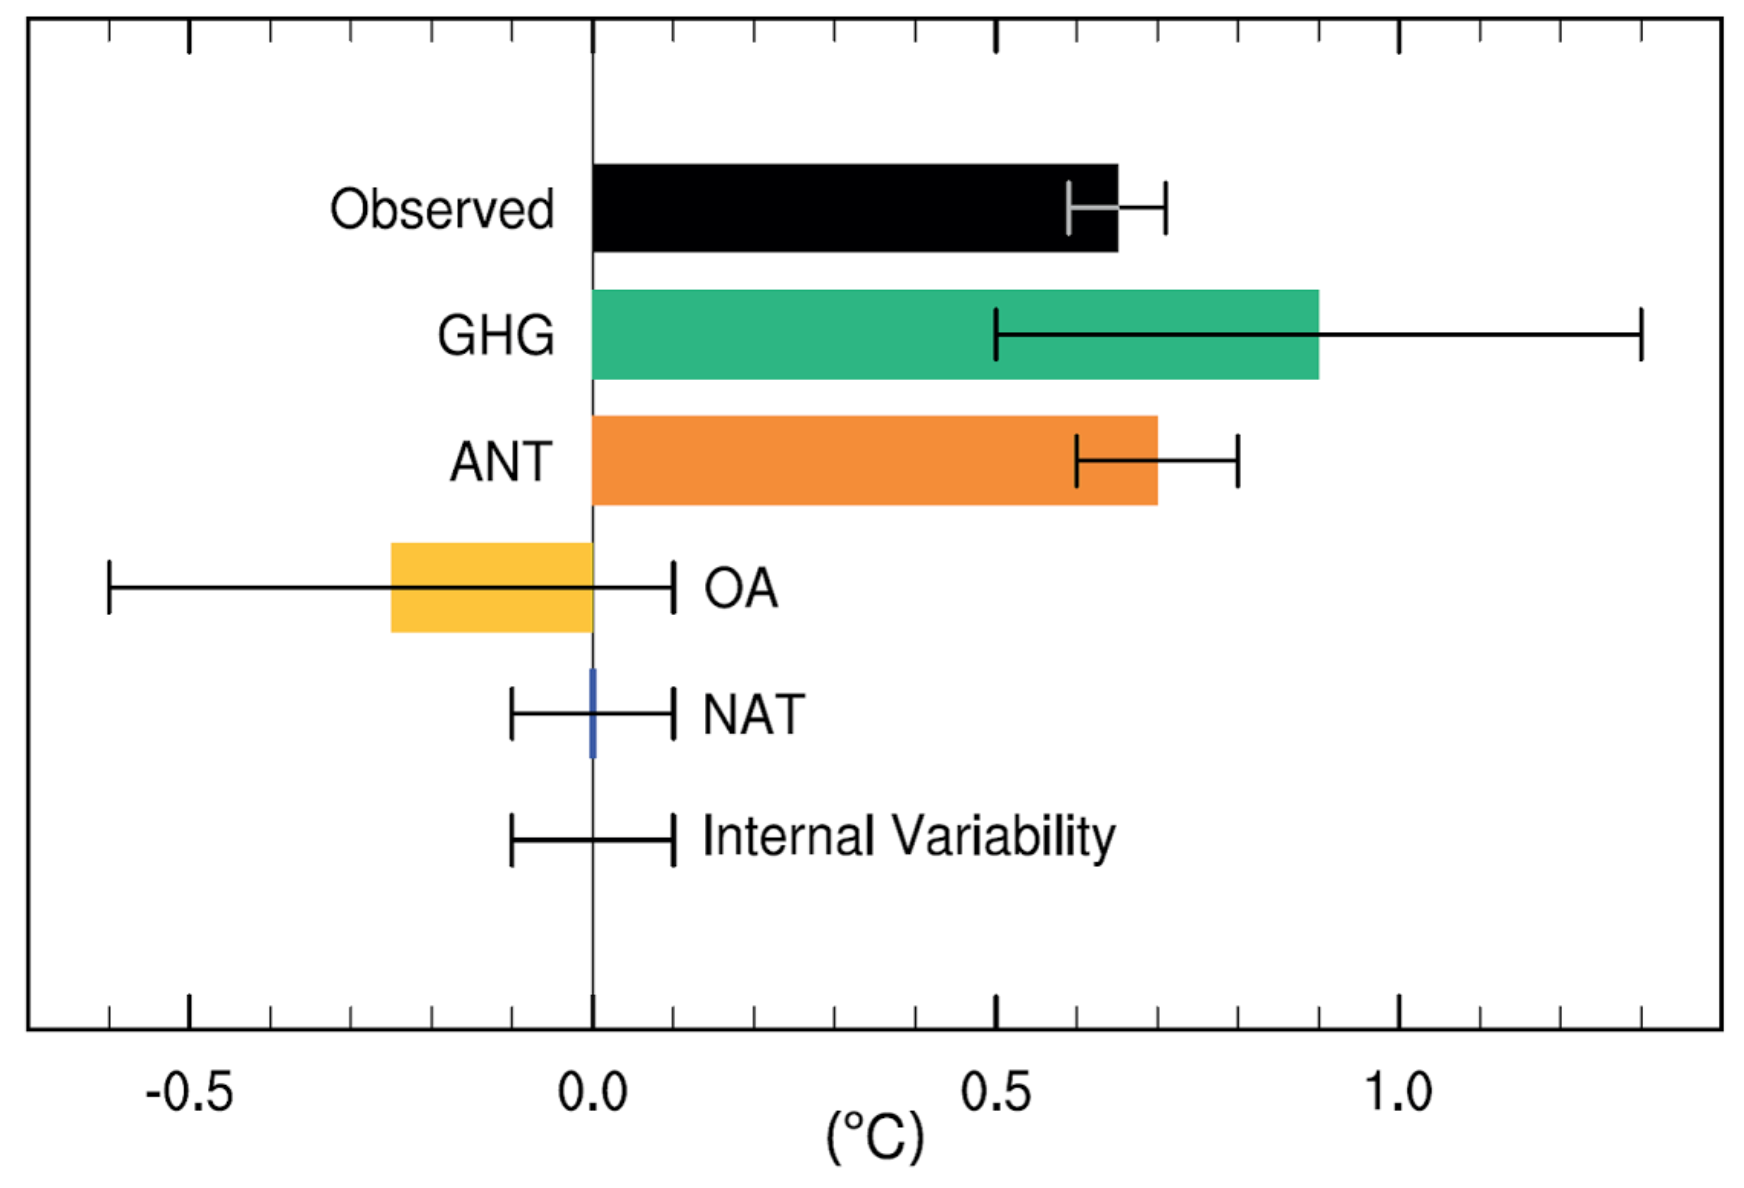 IPCC graph showing igure TS10 from the IPCC Fifth Assessment Report. Observed temperatures are from HadCRUT4. GHG is all well-mixed greenhouse gases, ANT is total human forcings, OA is human forcings apart from GHG (mostly aerosols), NAT is natural forcings (solar and volcanoes), and Internal Variability is an estimate of the potential impact of multidecadal ocean cycles and similar factors. Error bars show one-sigma uncertainties for each.